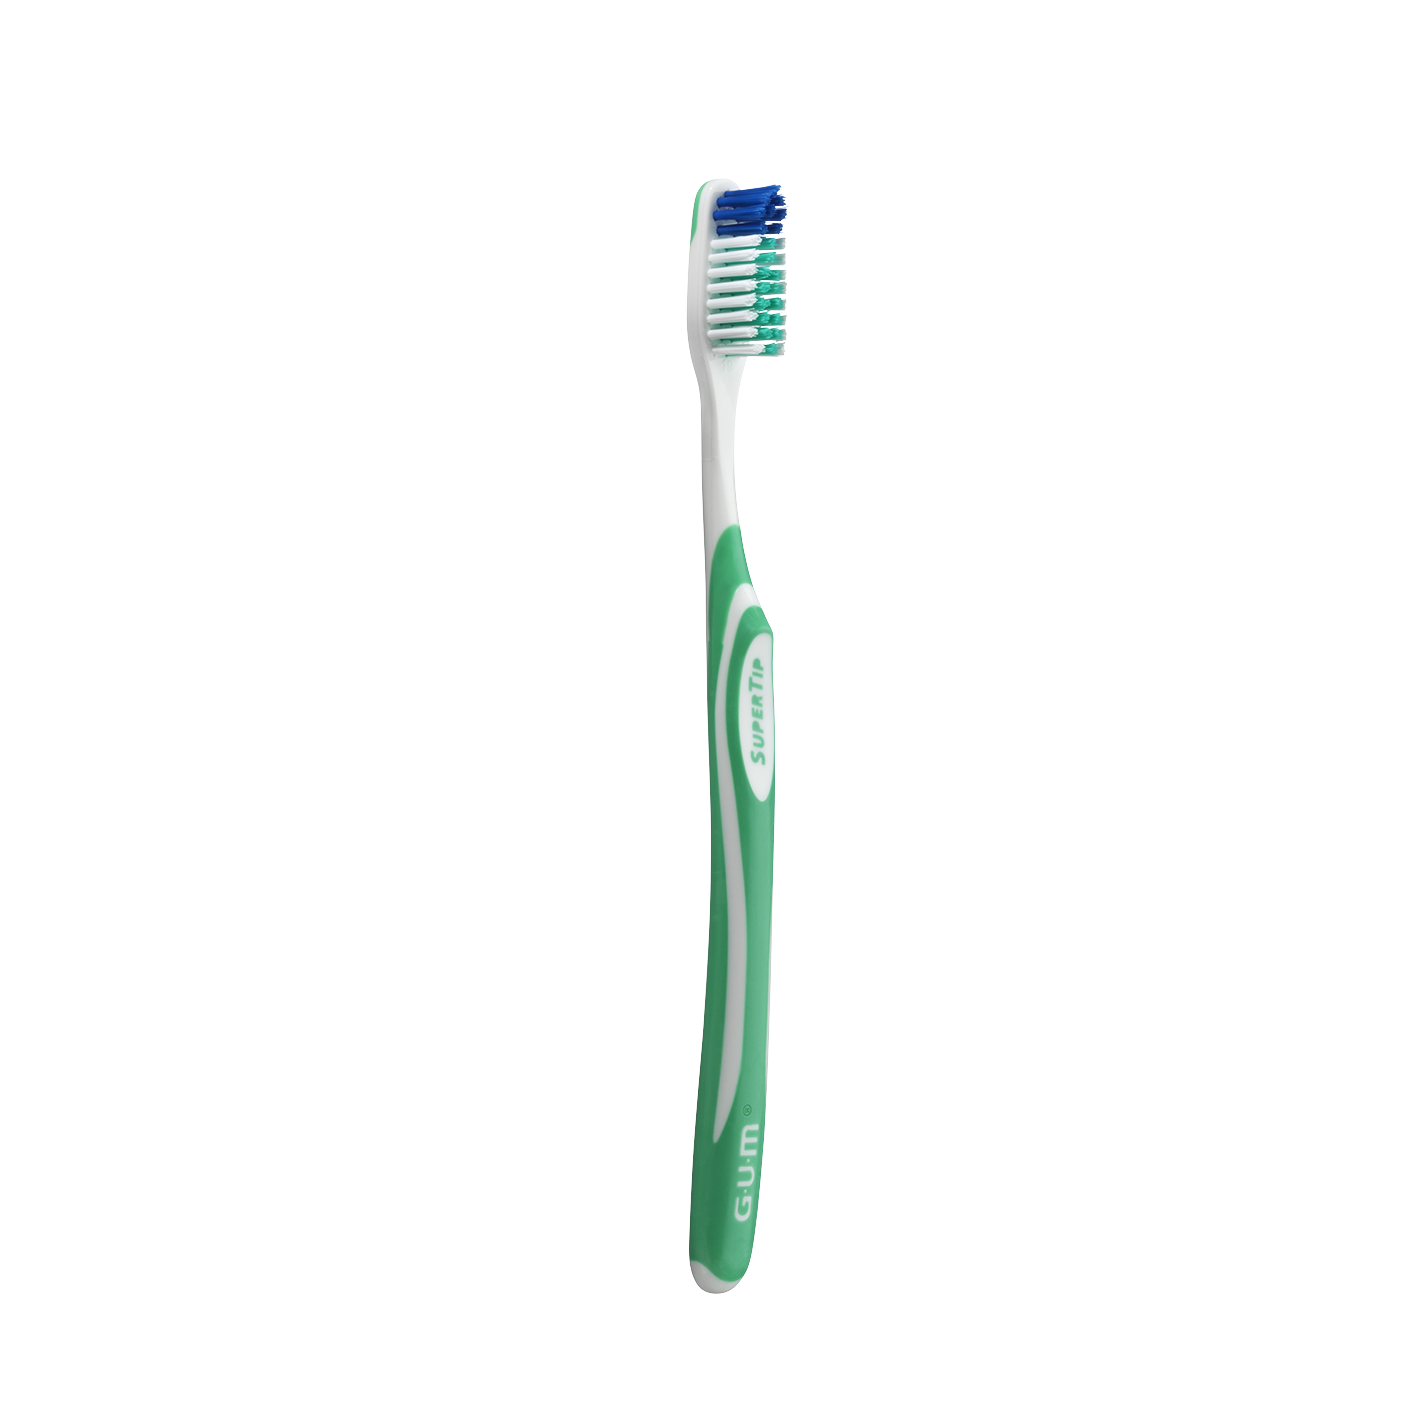 Green Toothbrush PNG HD Images - Toothbrush Png